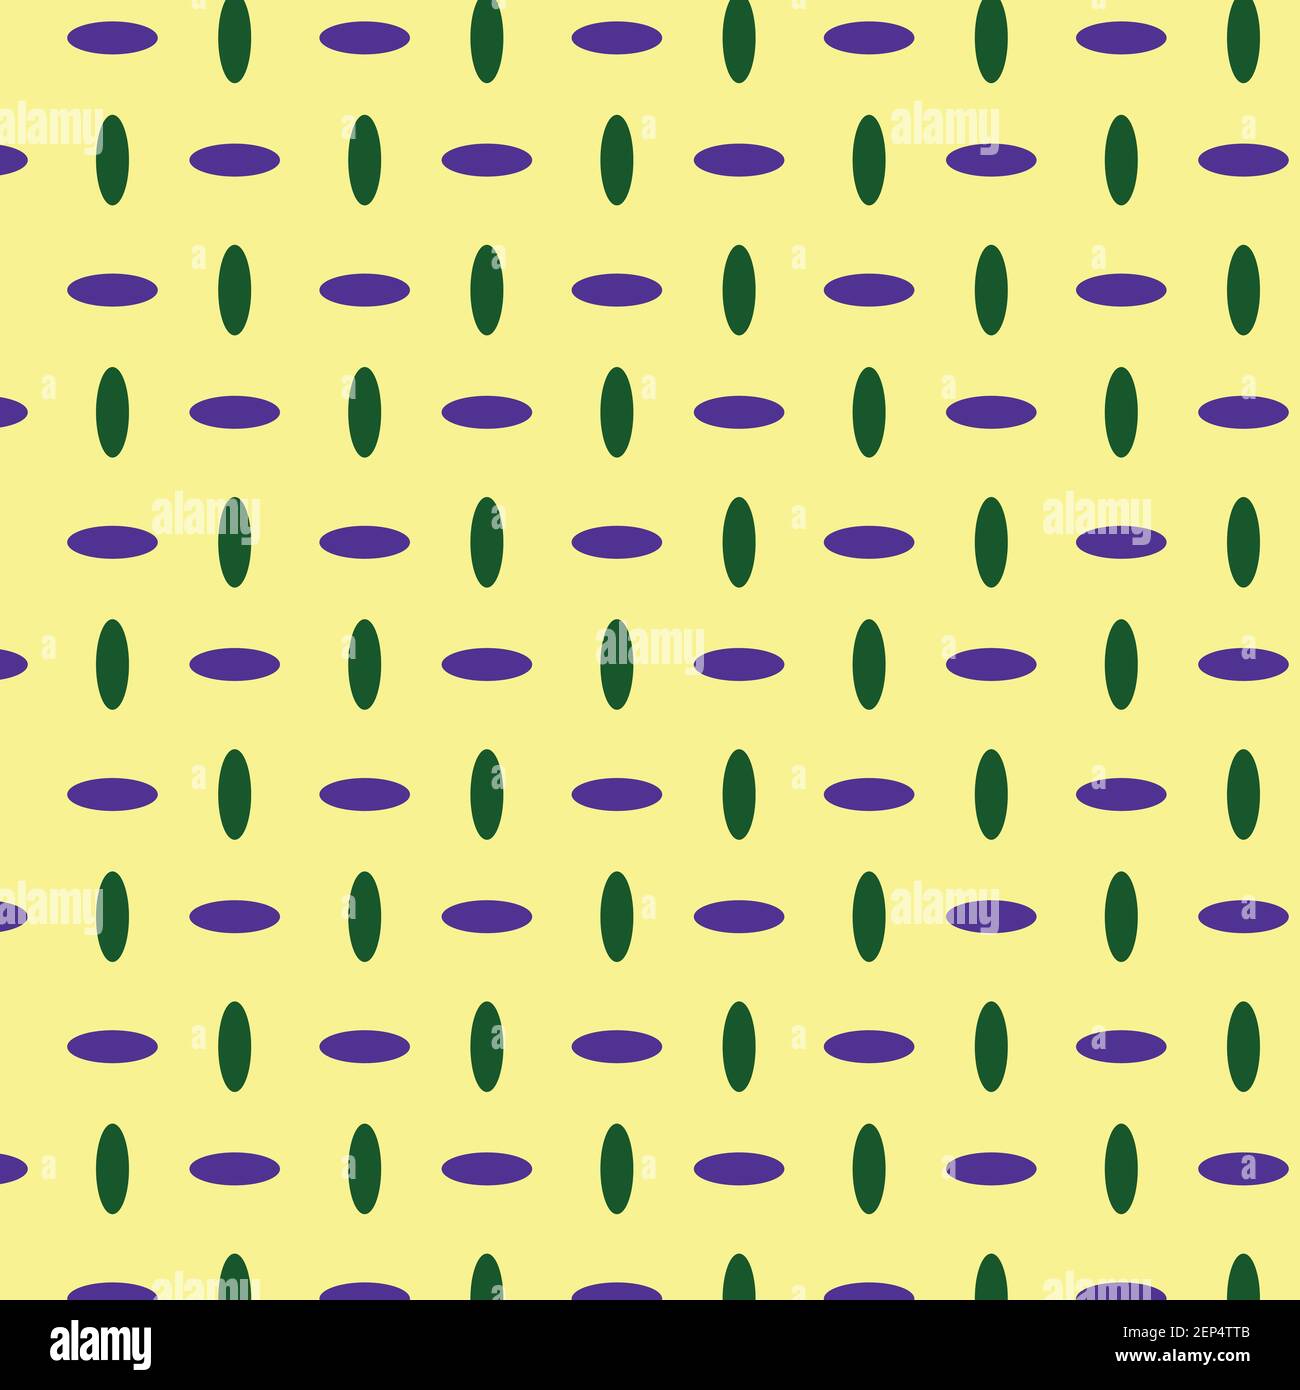 Long oval shaped violet and green color pattern on light yellow background book cover,  present, wallpaper, wrapping, texture, ornaments packing, carp Stock Vector